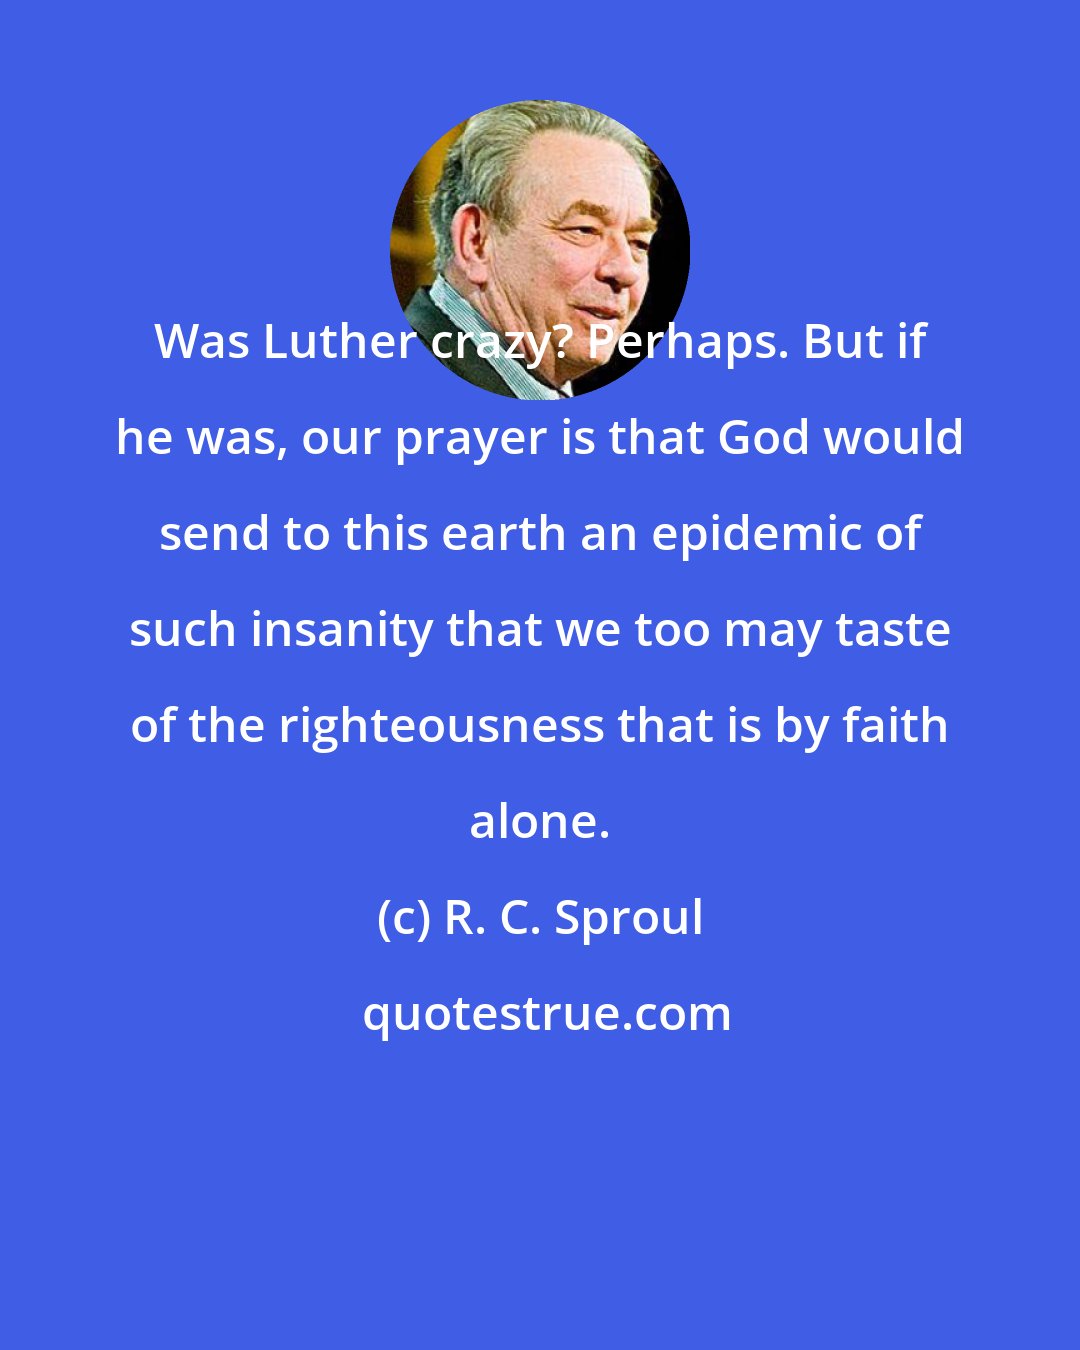 R. C. Sproul: Was Luther crazy? Perhaps. But if he was, our prayer is that God would send to this earth an epidemic of such insanity that we too may taste of the righteousness that is by faith alone.